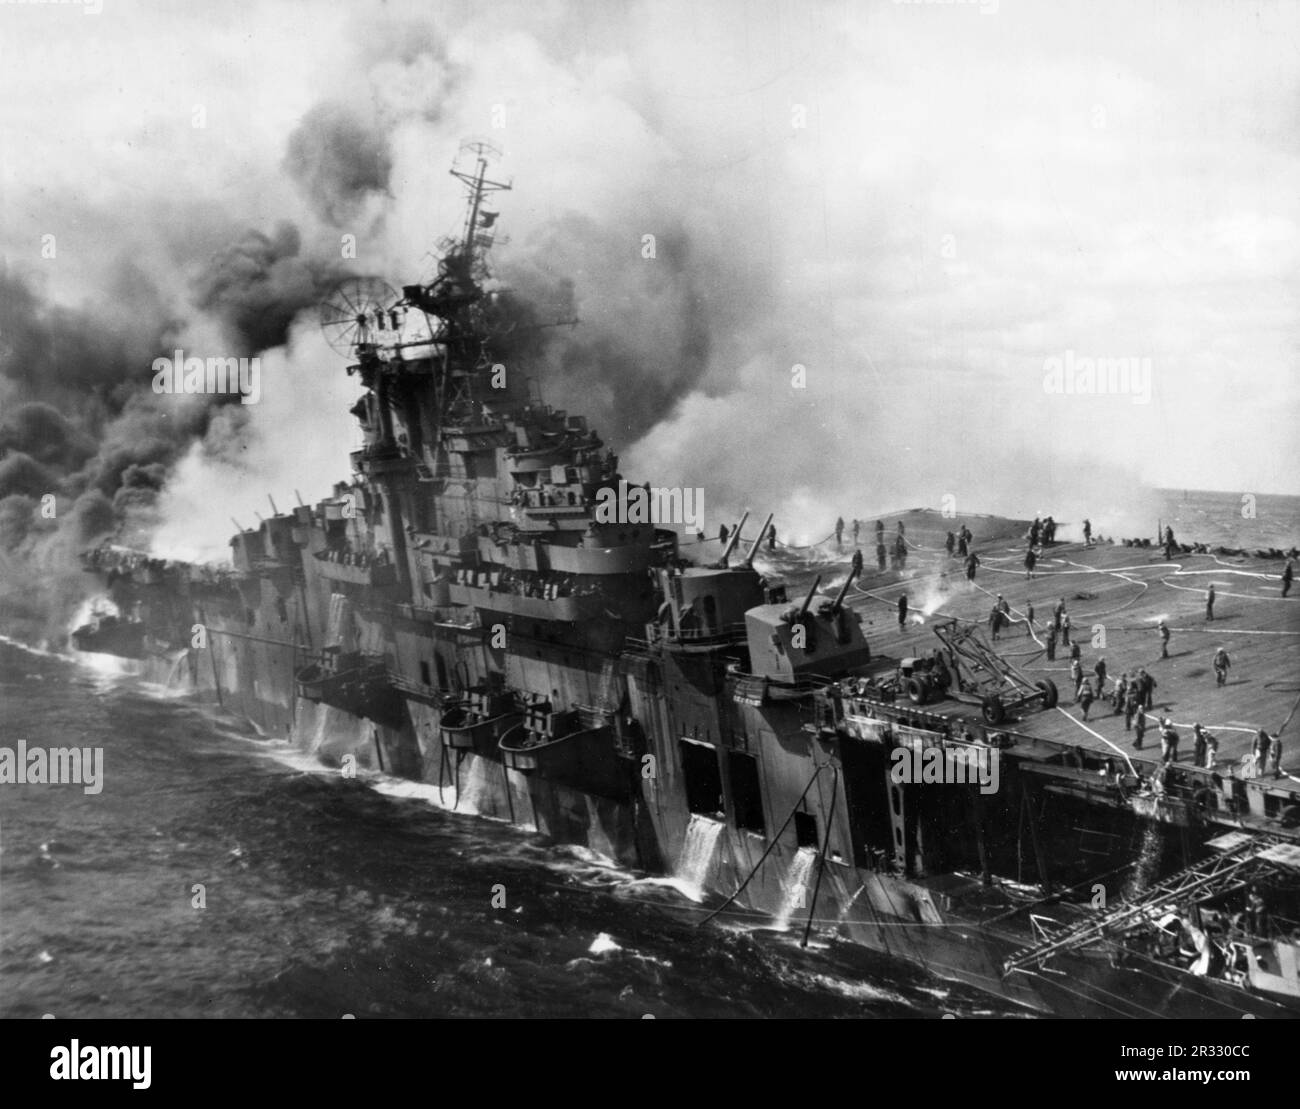 The US aircraft carrier USS Franklin stationary and on fire on 19 March 1945. The Franklin was hit by two bombs which caused major damage to the carrier.  The Franklin did not sink nd returned to the USA for repair. The ship was decommissioned in 1947 and scrapped in 1966. Stock Photo